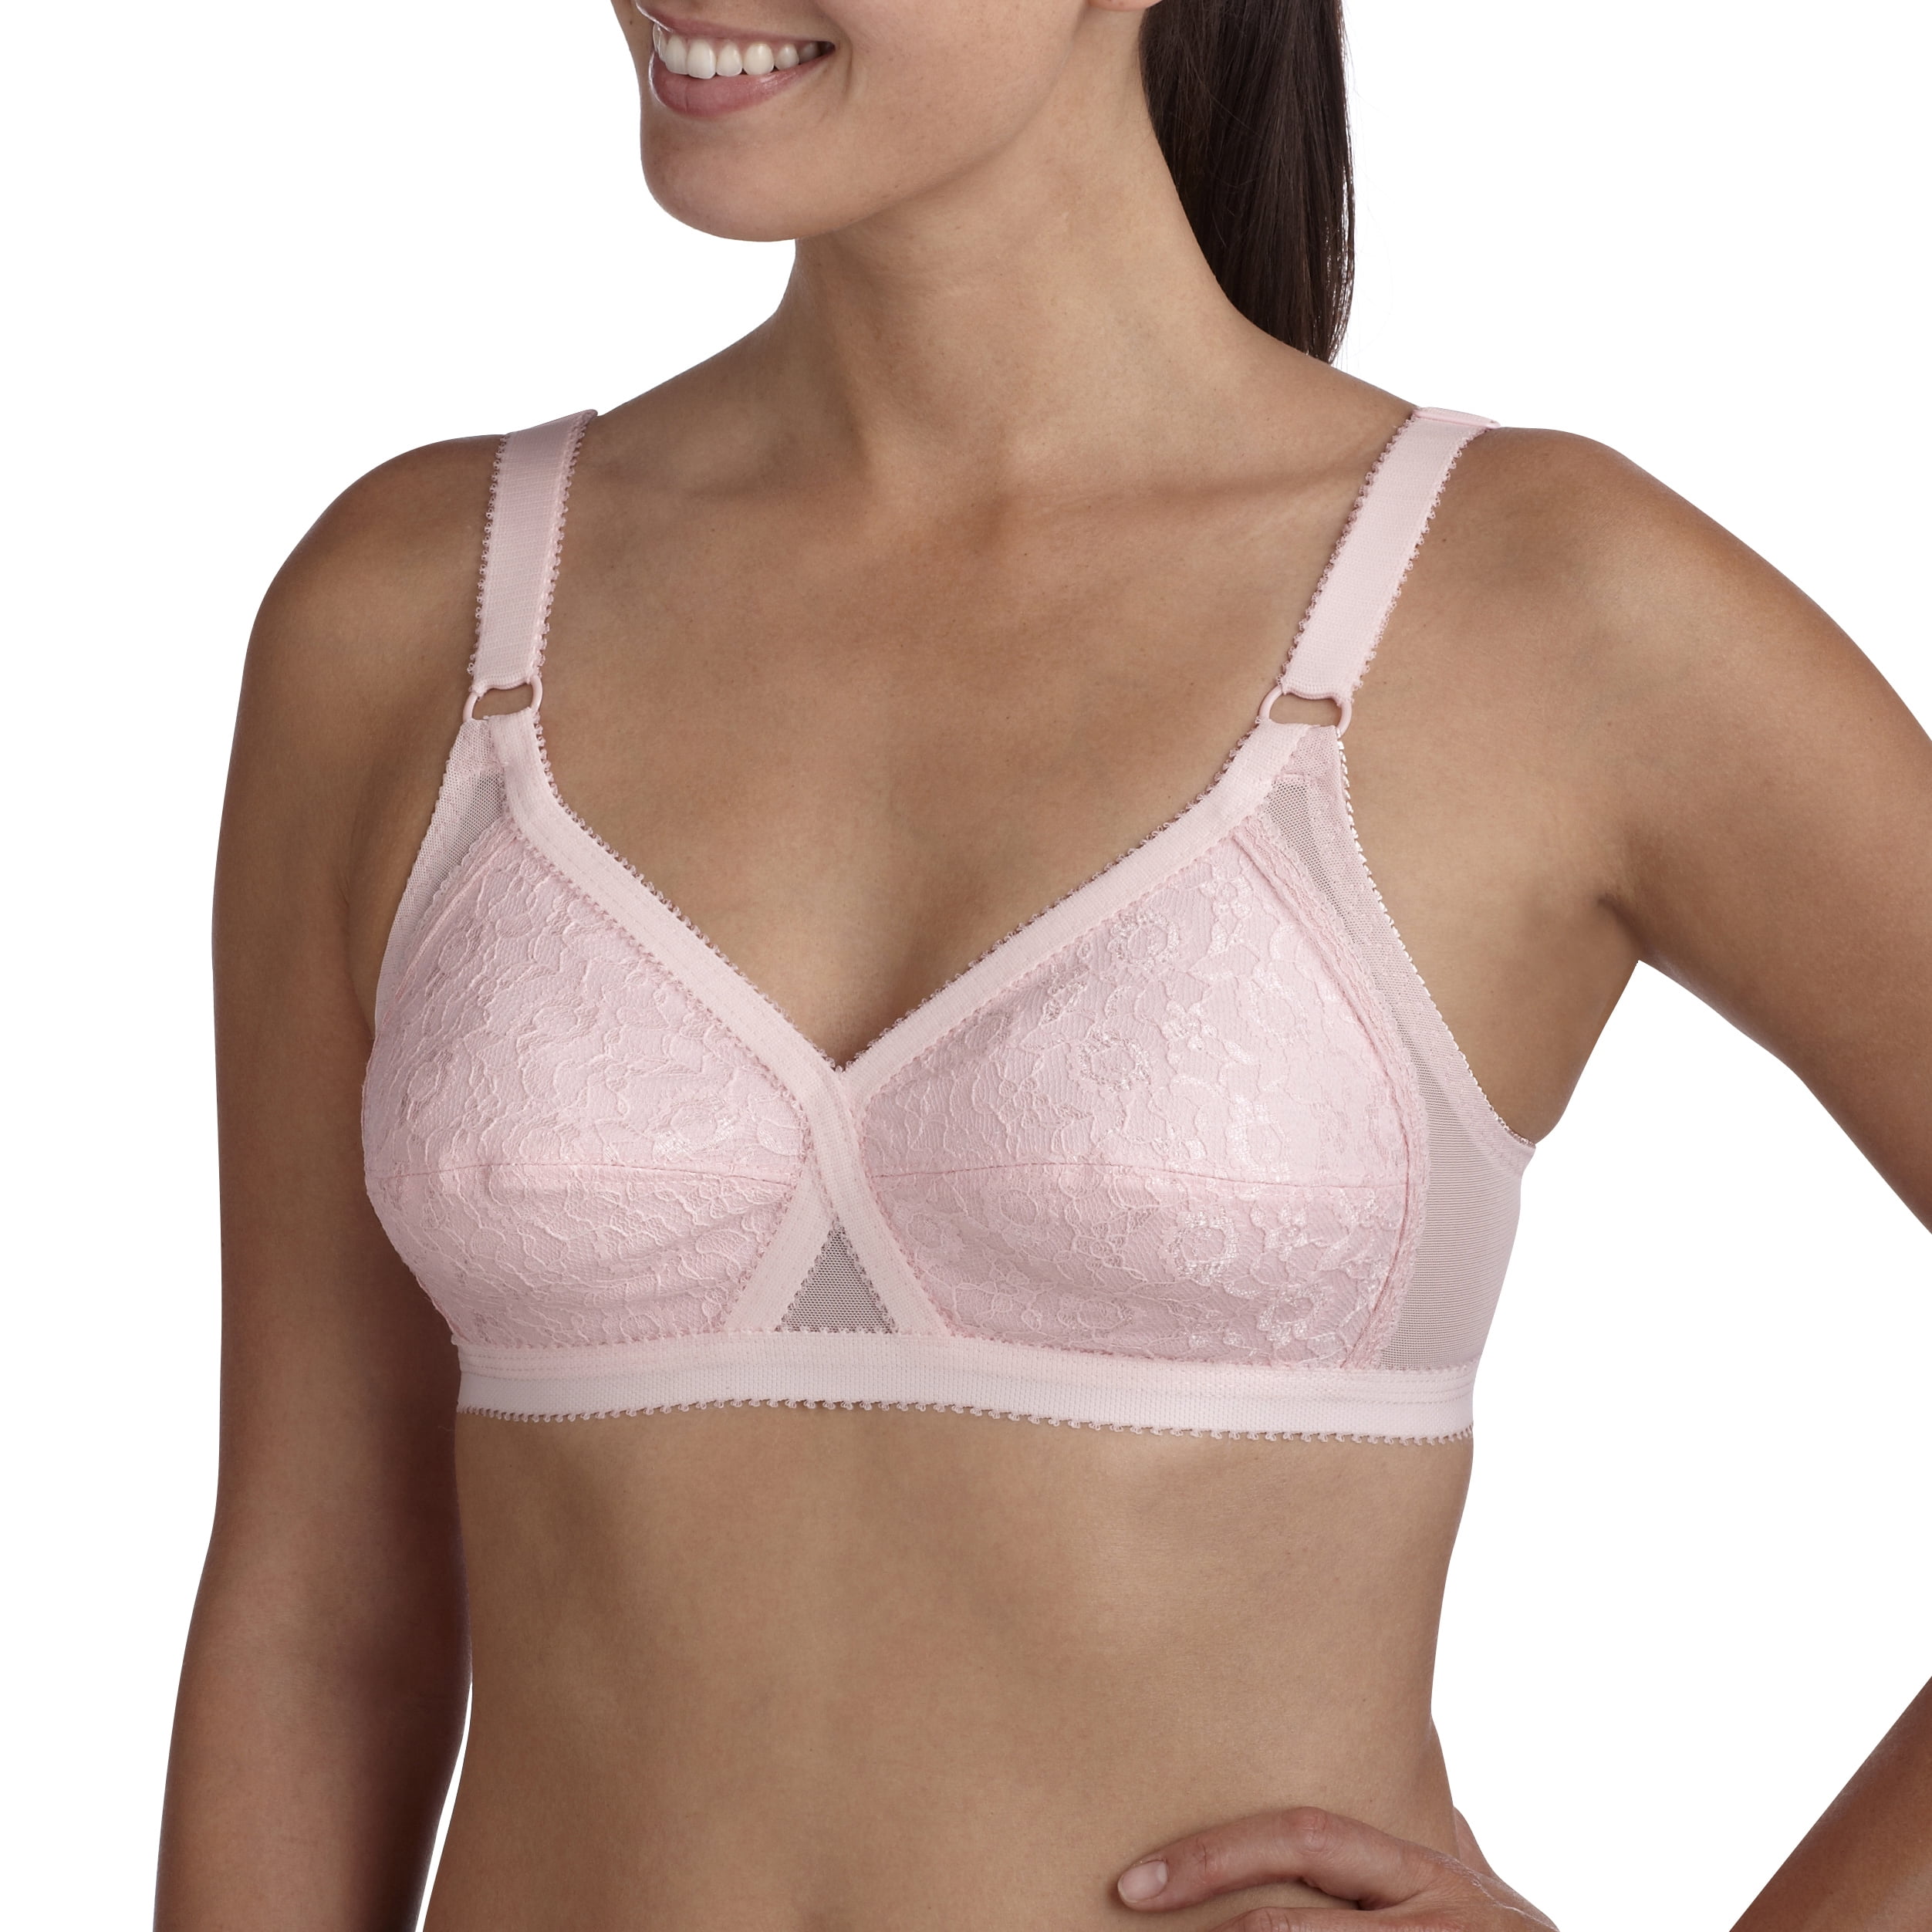 Women's Mastectomy Bra with Soft Lace 